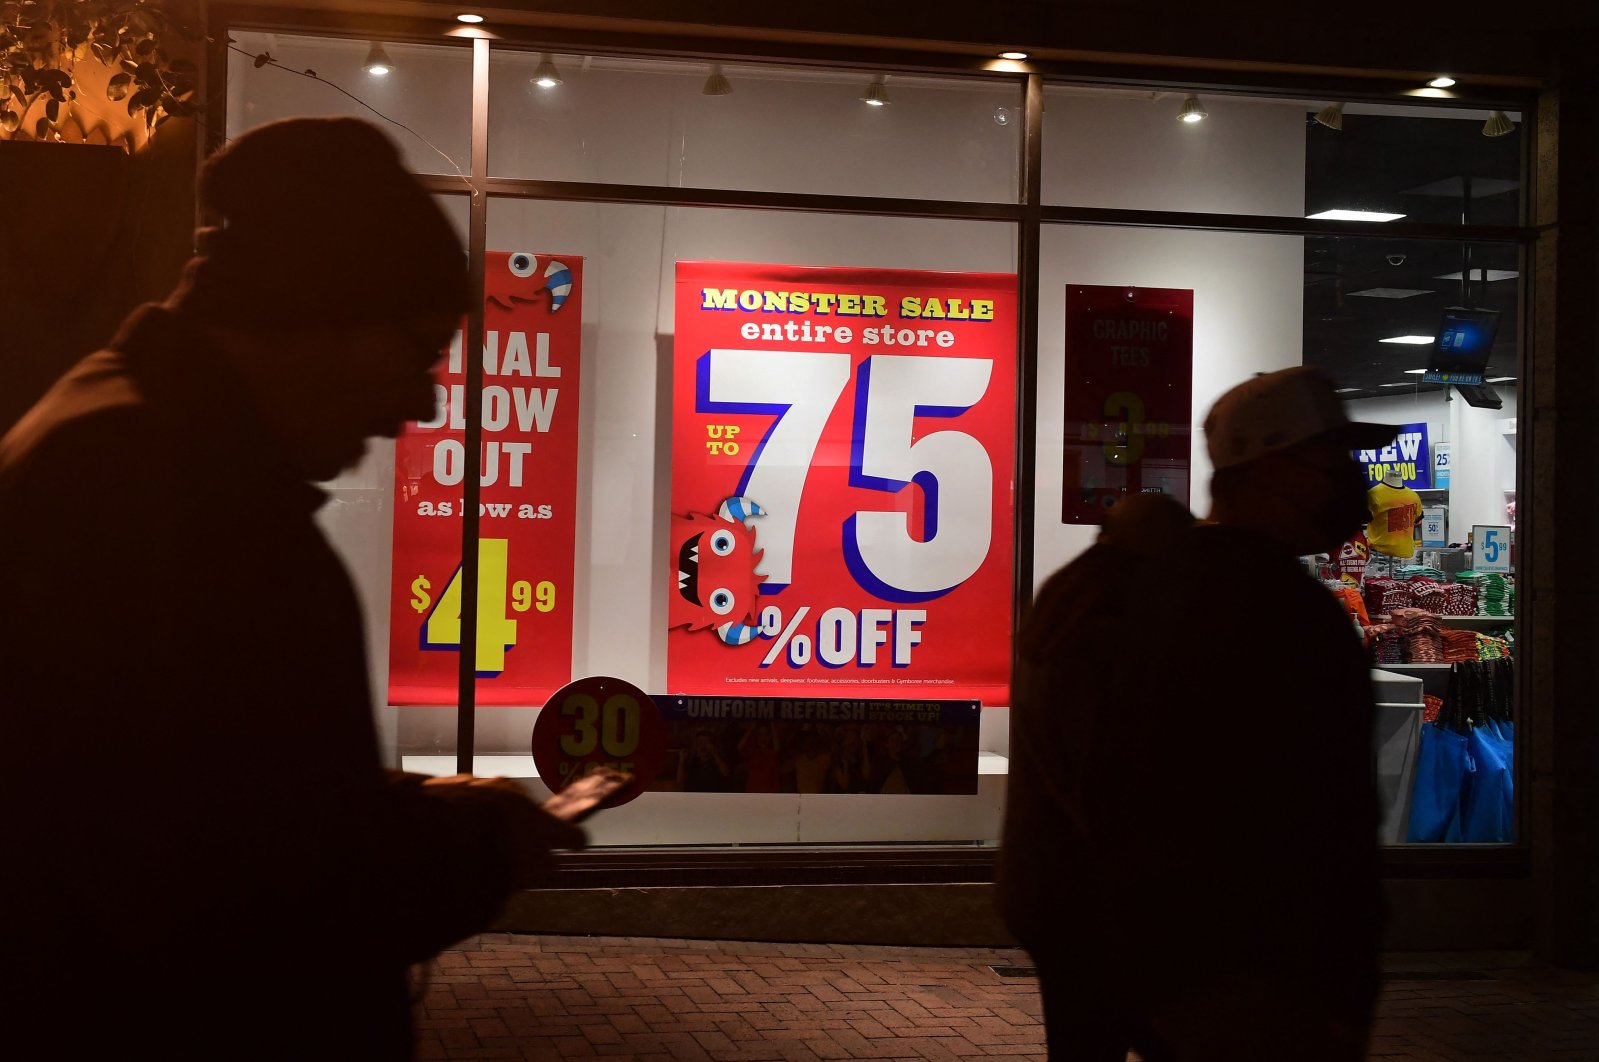 Sales signs are seen in the windows as people shop for bargains at a retail outlet in Los Angeles, California, U.S., Jan. 28, 2022. (AFP Photo)